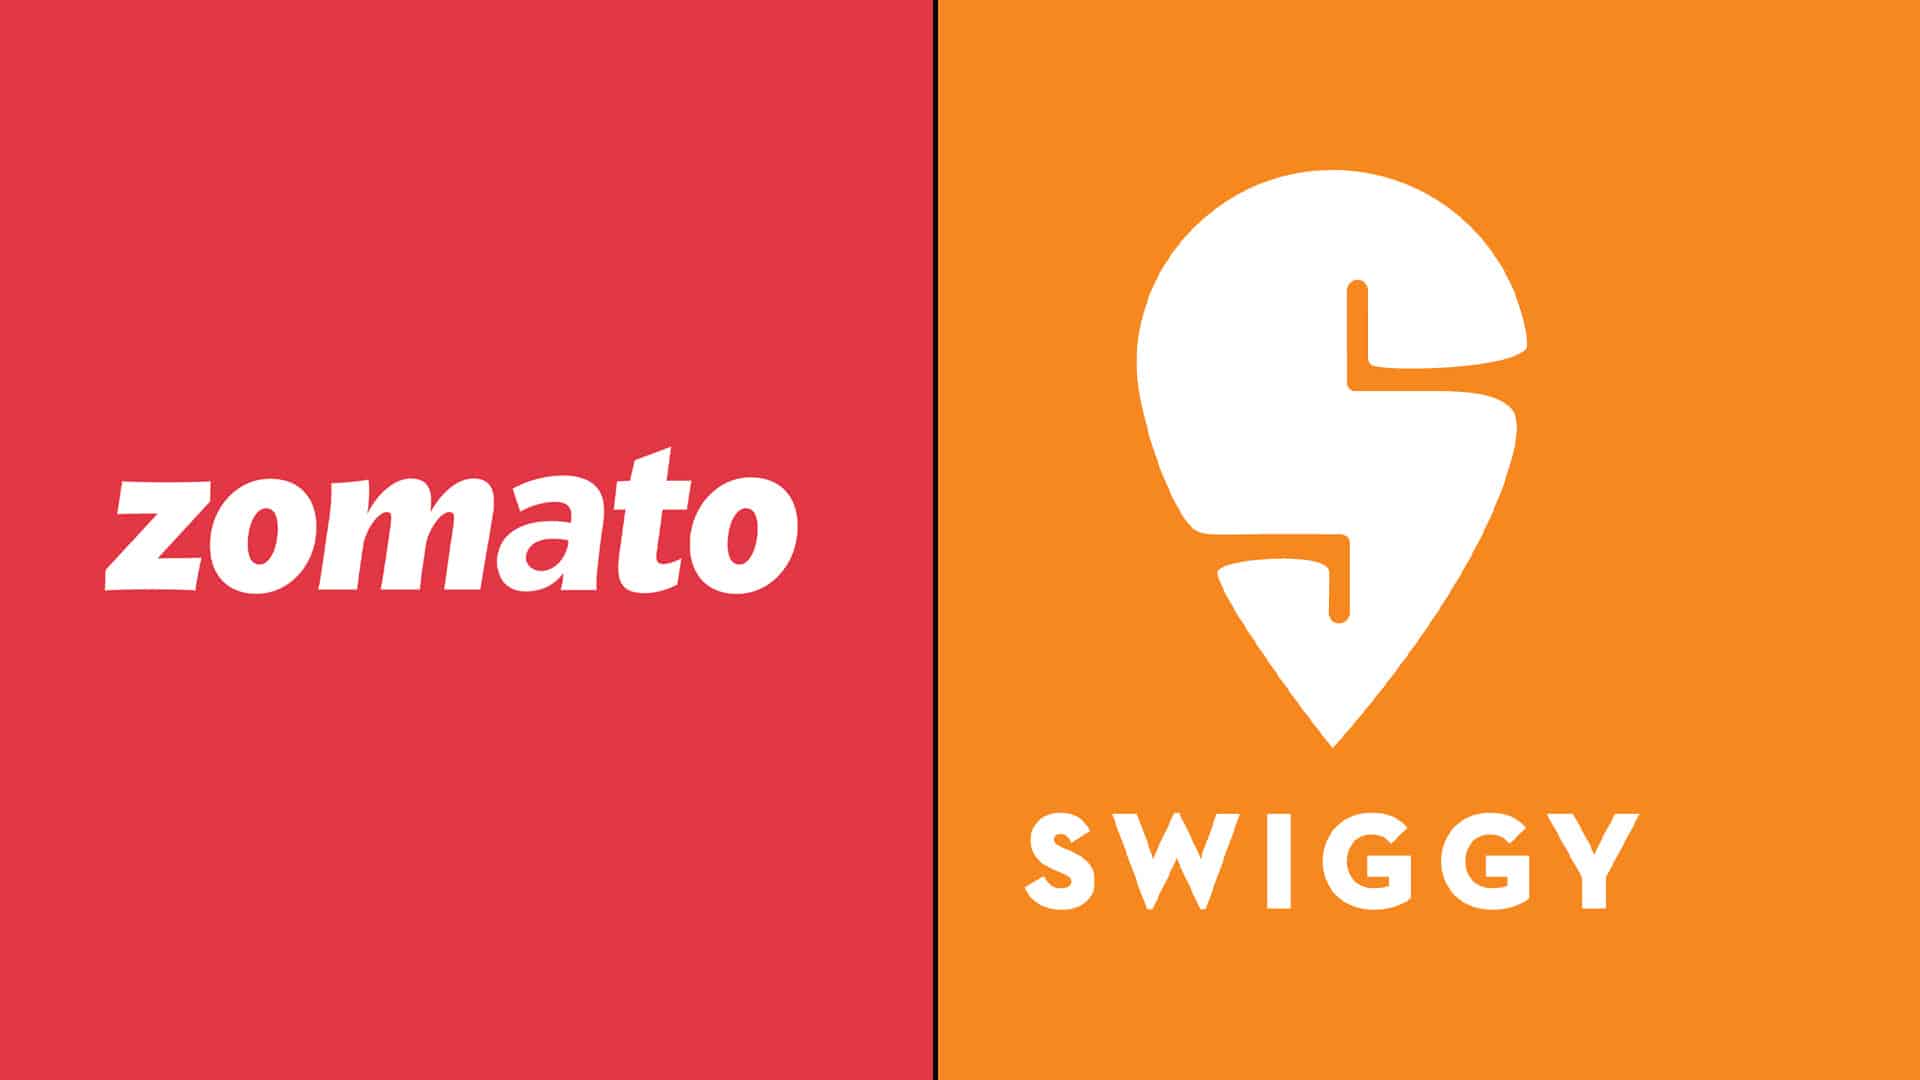 Zomato Pay, Swiggy Diner discount progs against interest of restaurant owners: NRAI